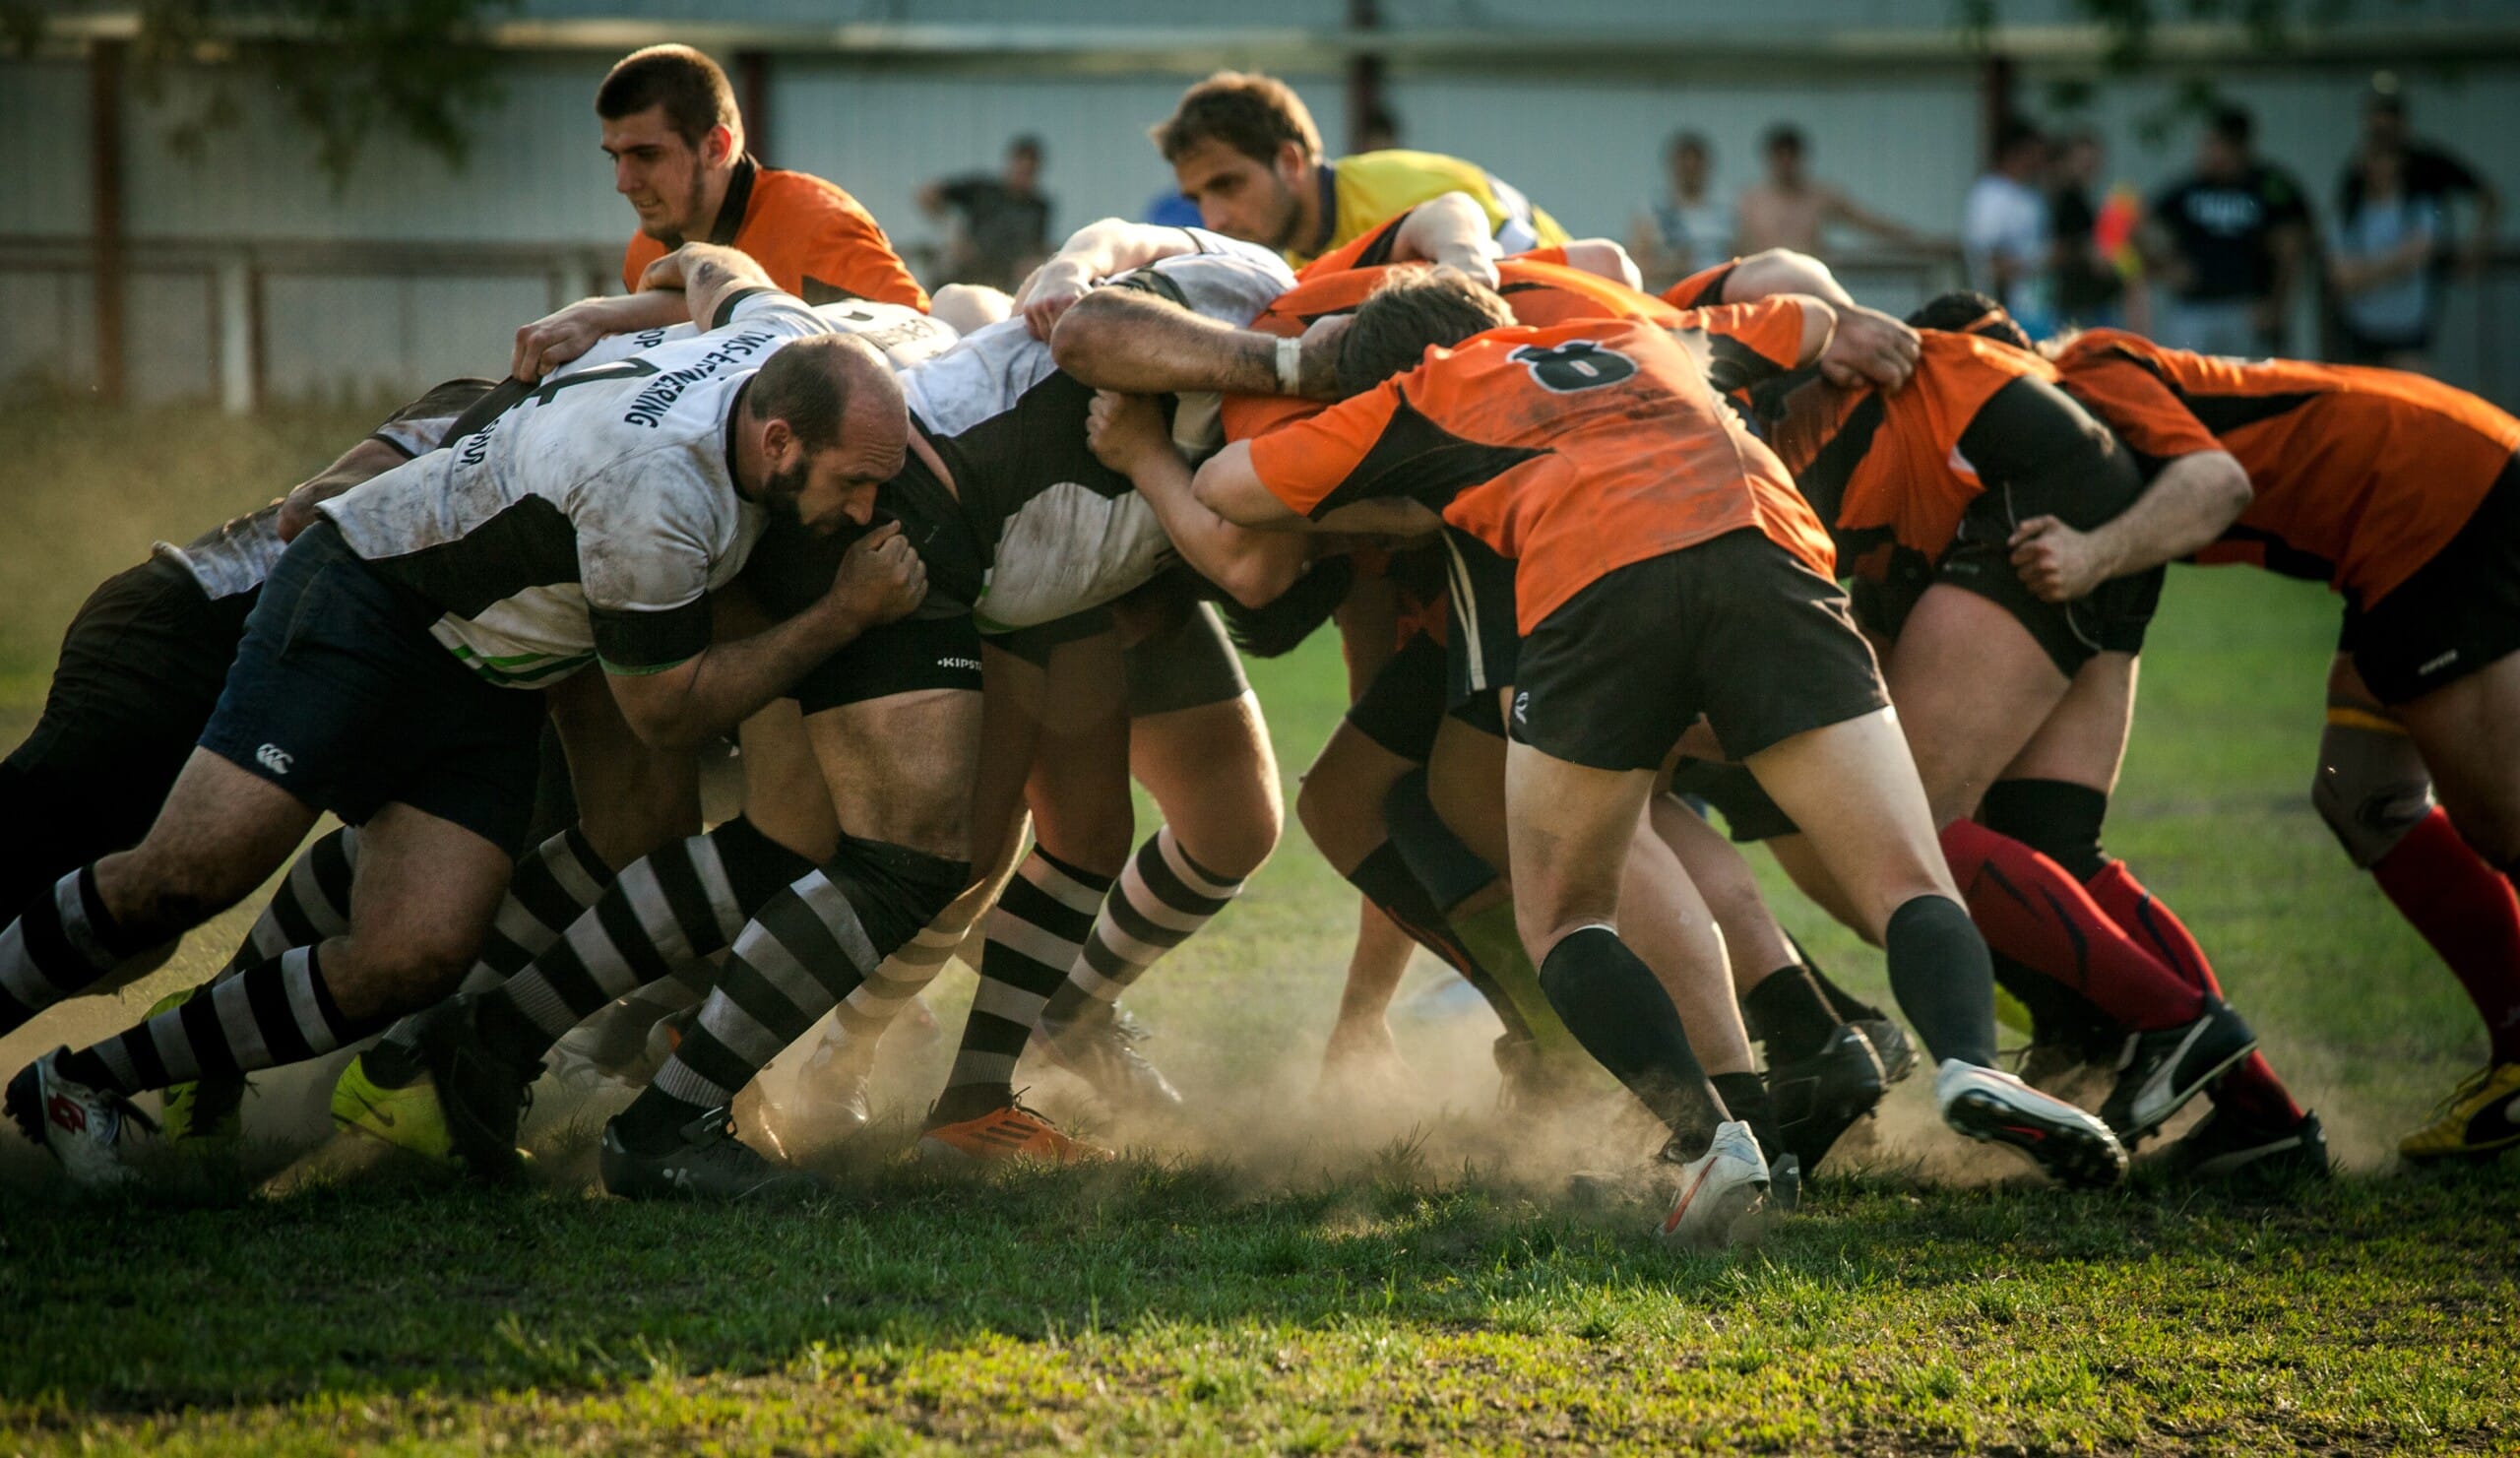 A group of rugby players are fighting for the ball, showcasing their strength and agility on the field.